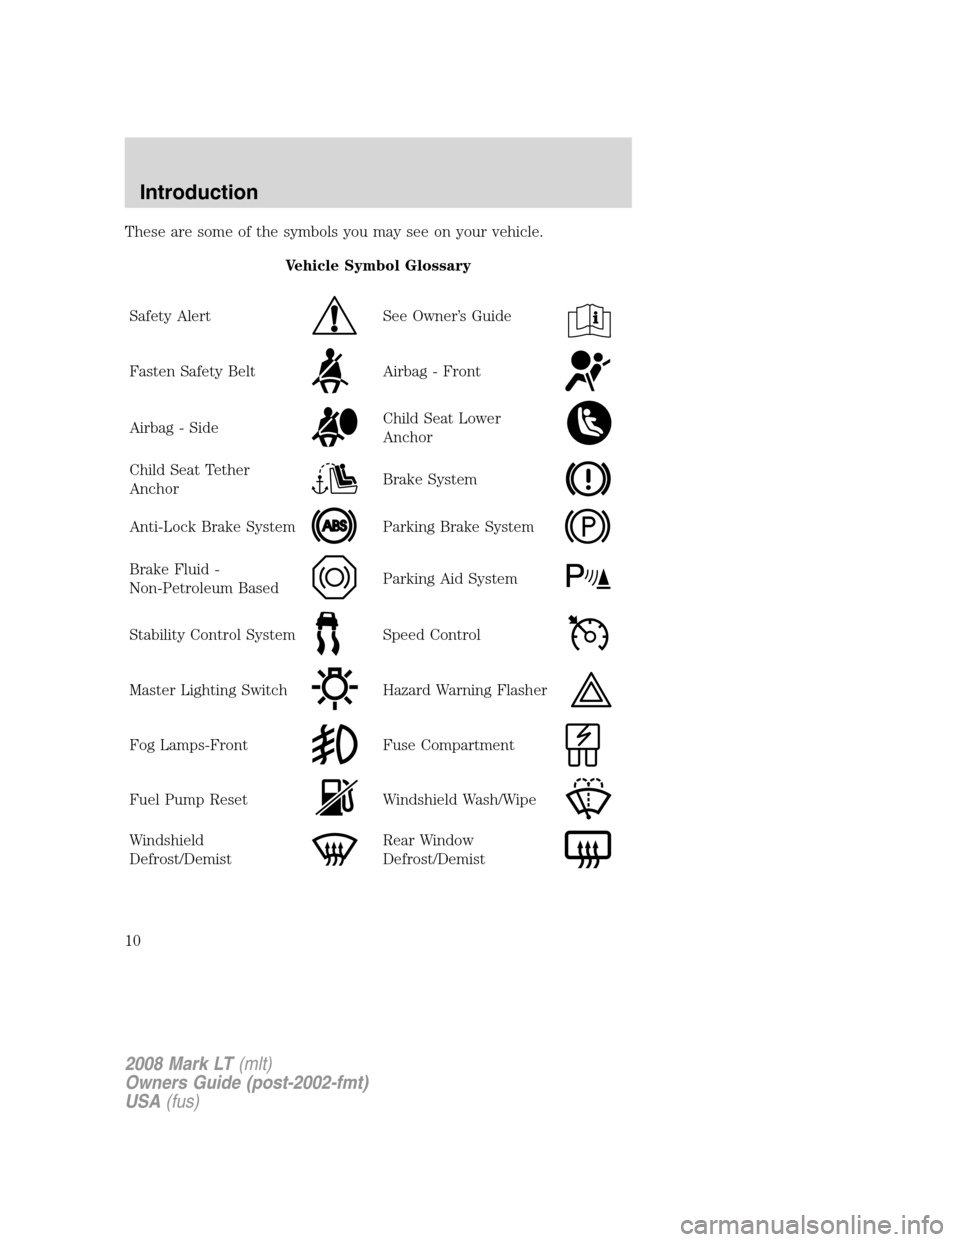 LINCOLN MARK LT 2008  Owners Manual These are some of the symbols you may see on your vehicle.
Vehicle Symbol Glossary
Safety Alert
See Owner’s Guide
Fasten Safety BeltAirbag - Front
Airbag - SideChild Seat Lower
Anchor
Child Seat Tet